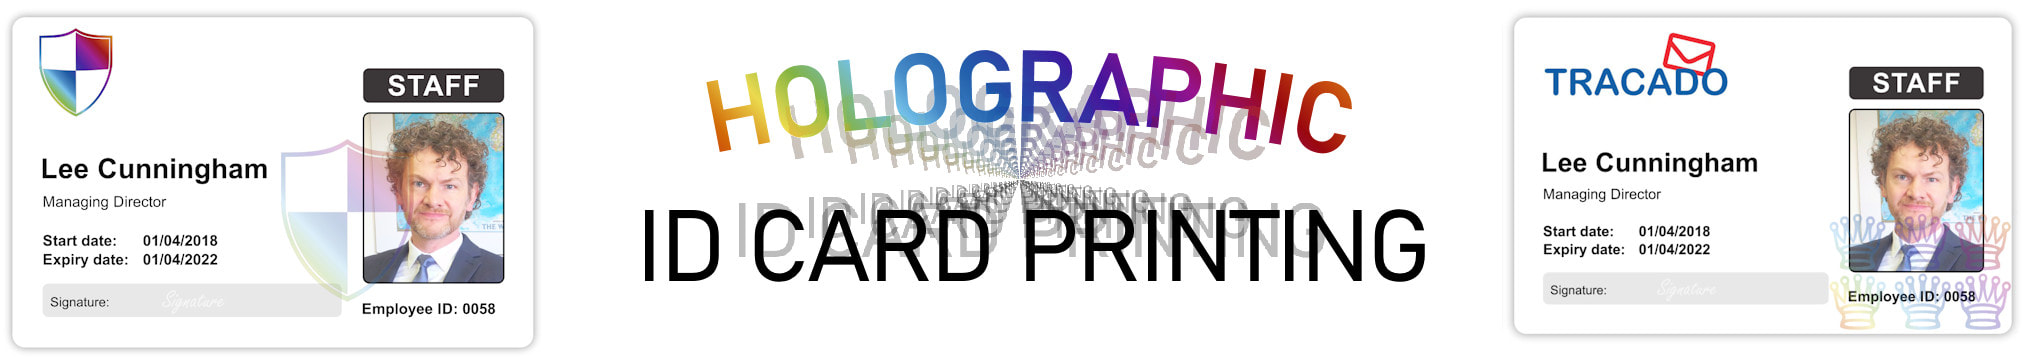 Leeds holographic ID card print service. Employee Identity cards with hologram or holograph security mark.